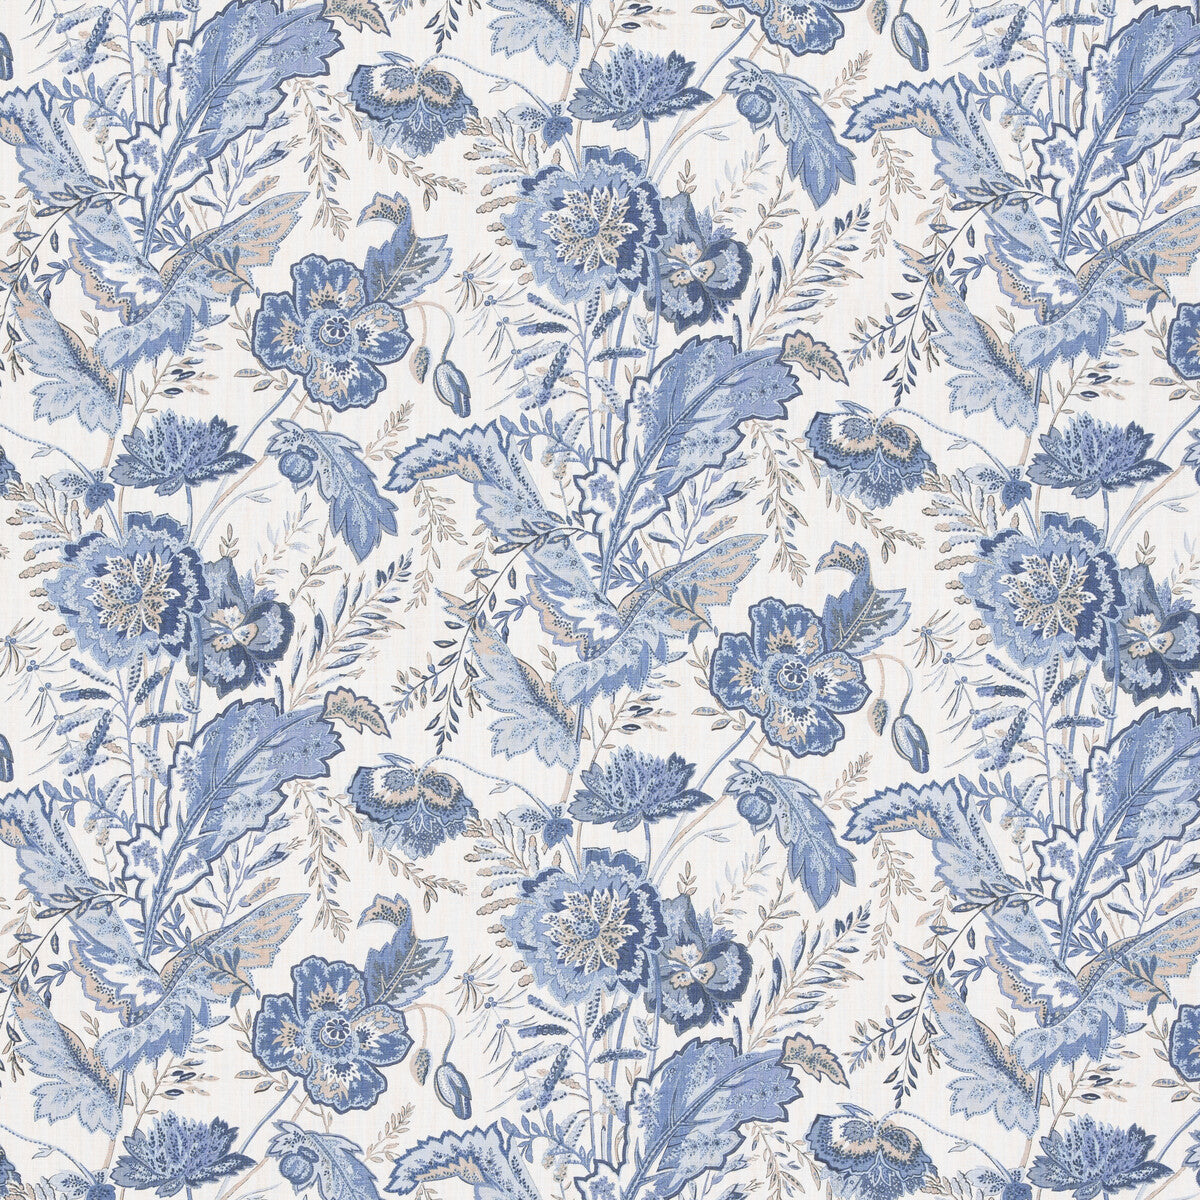 Indienne Flower fabric in blue color - pattern BP10938.1.0 - by G P &amp; J Baker in the Caspian collection